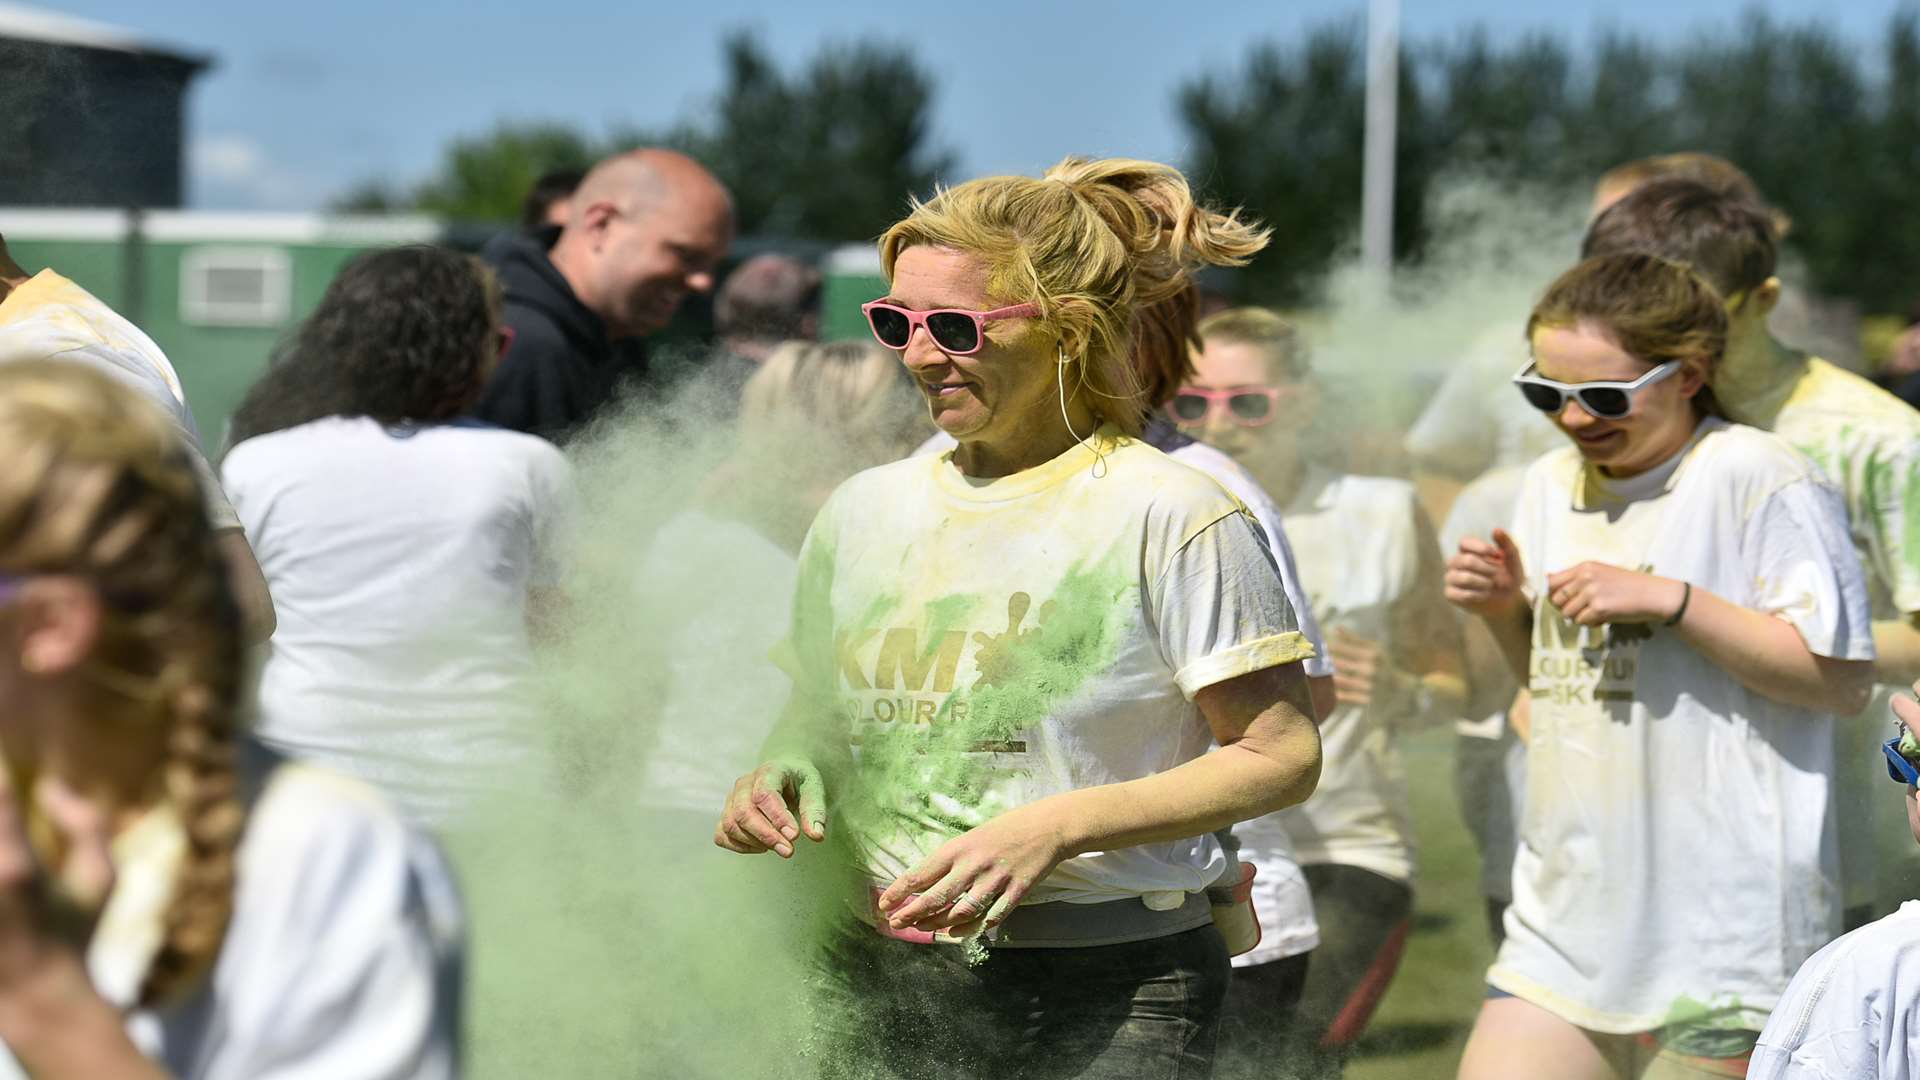 The KM Colour Run, staged at Bettshanger Park, near Deal on Sunday, June 12 is now a total sell-out.